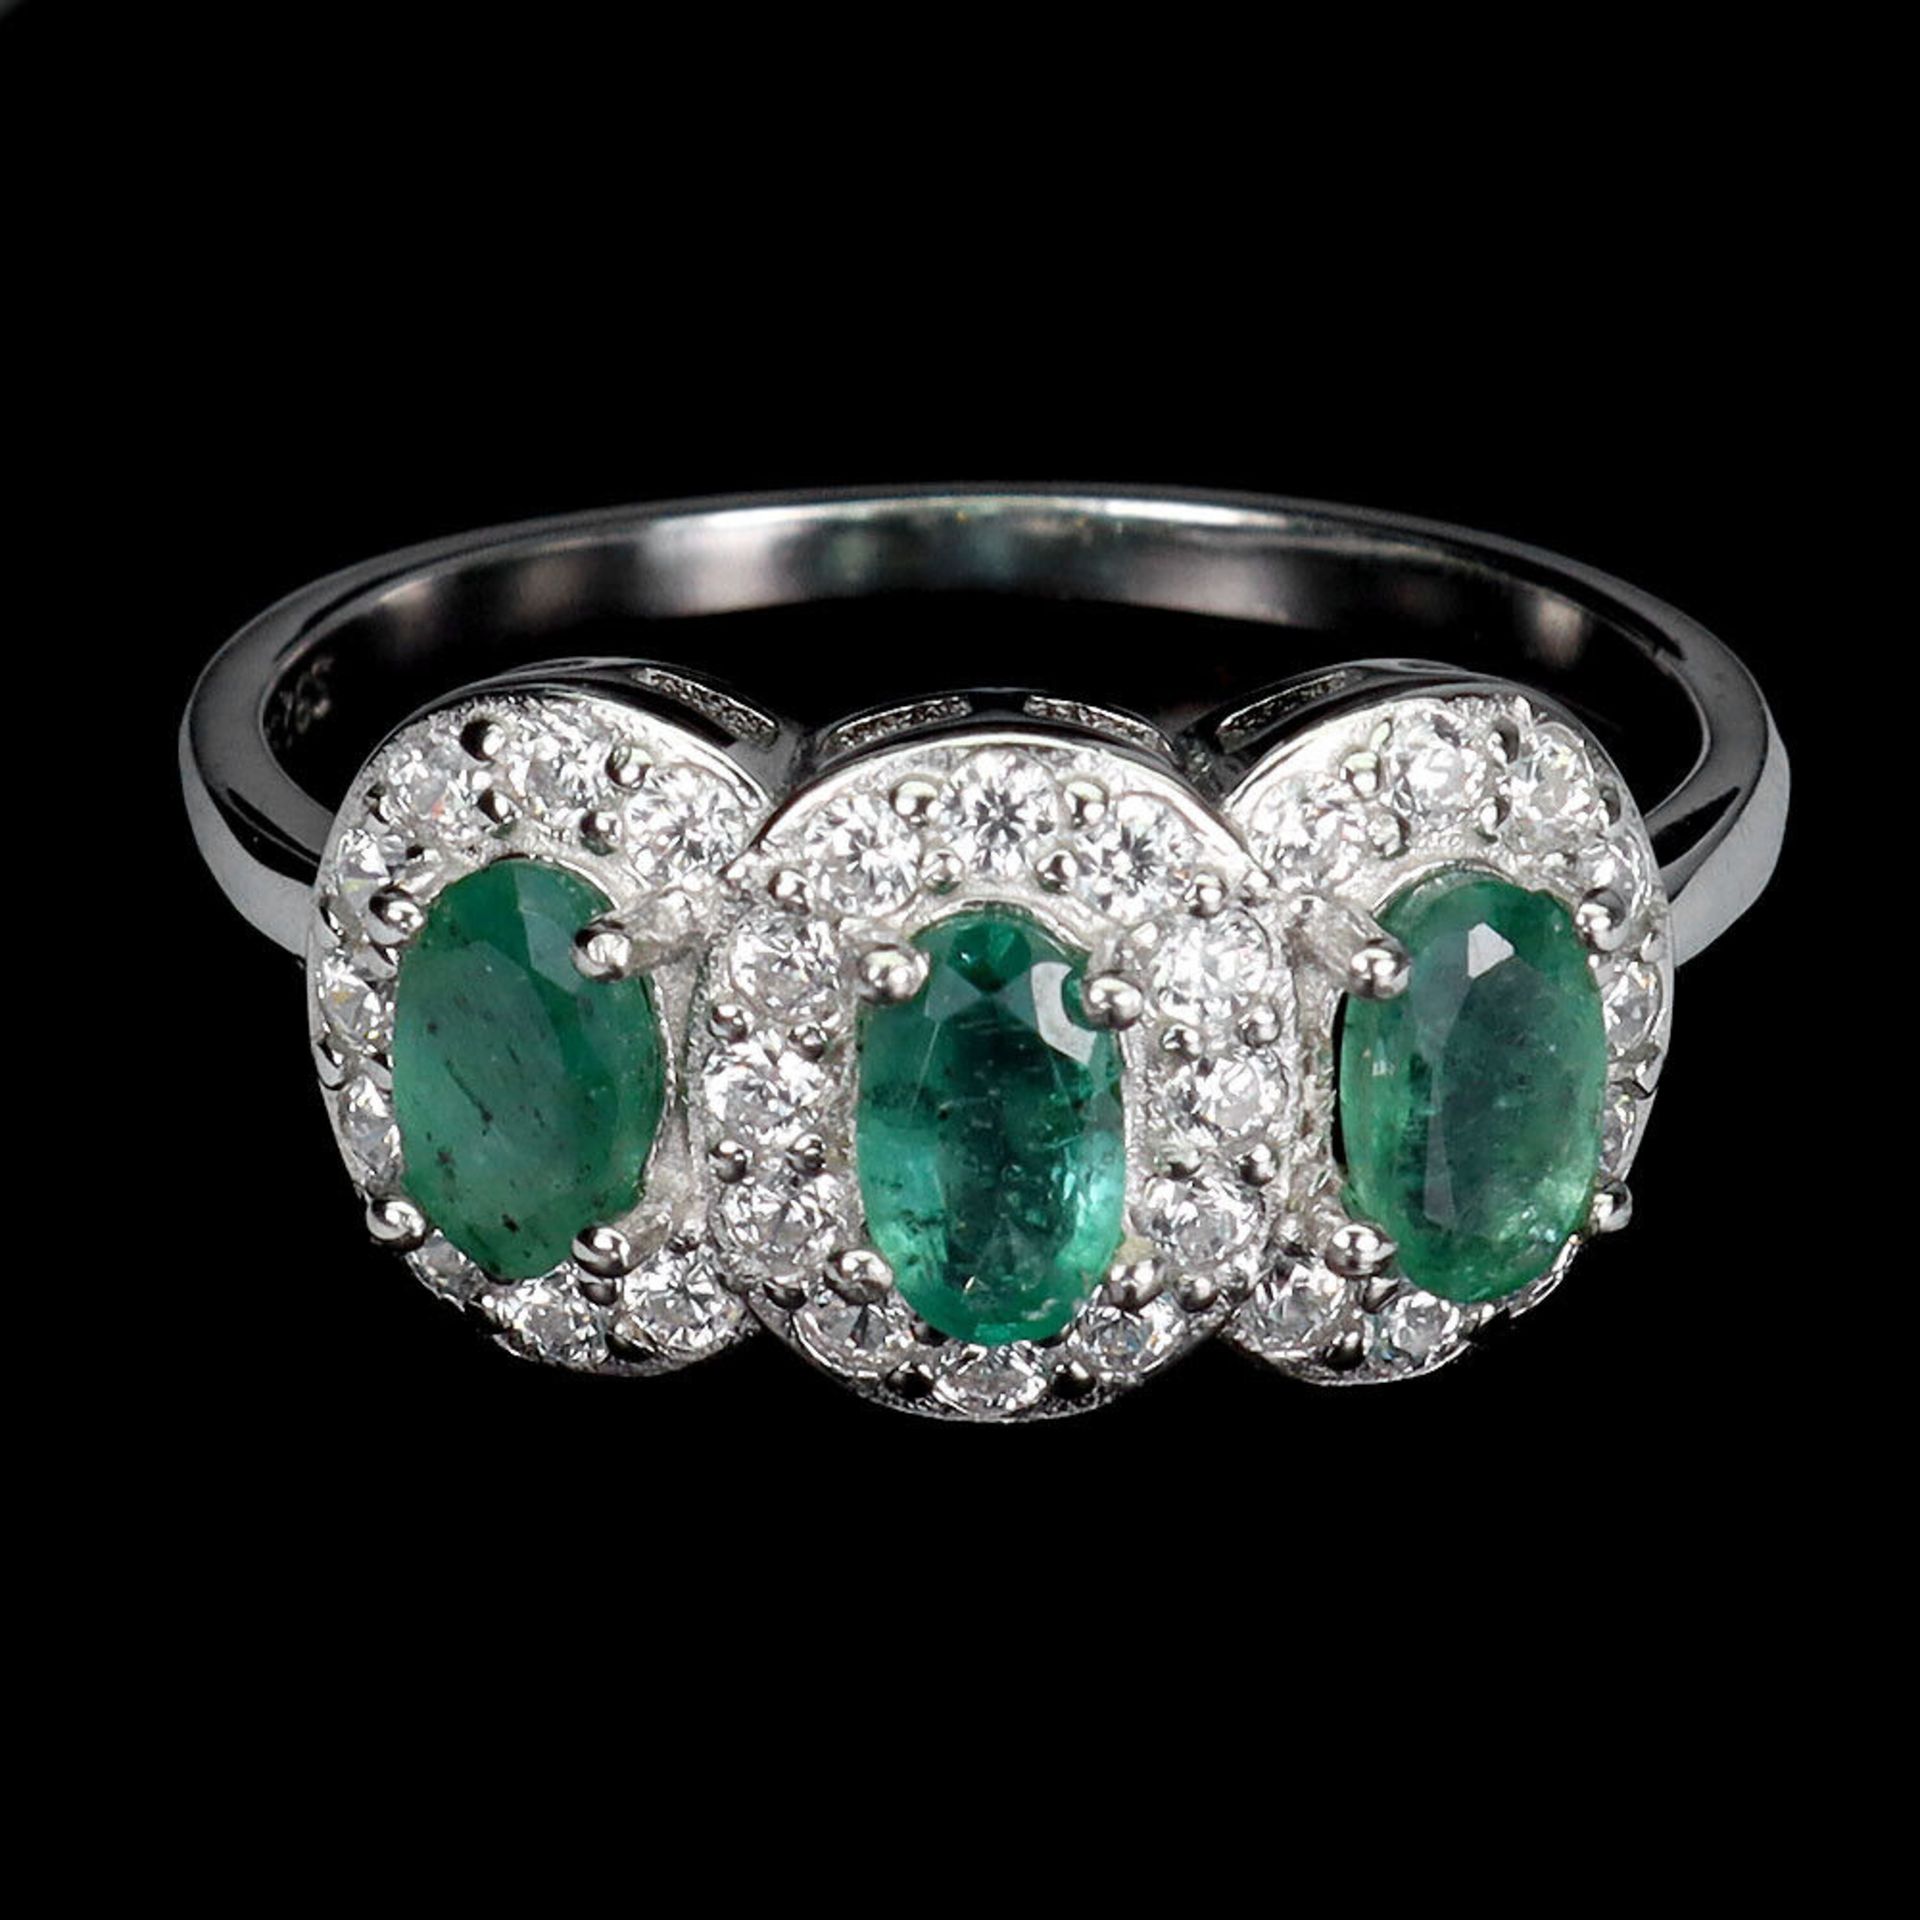 A 925 silver triple cluster ring set with oval cut emeralds and white stones, ring size N.5.